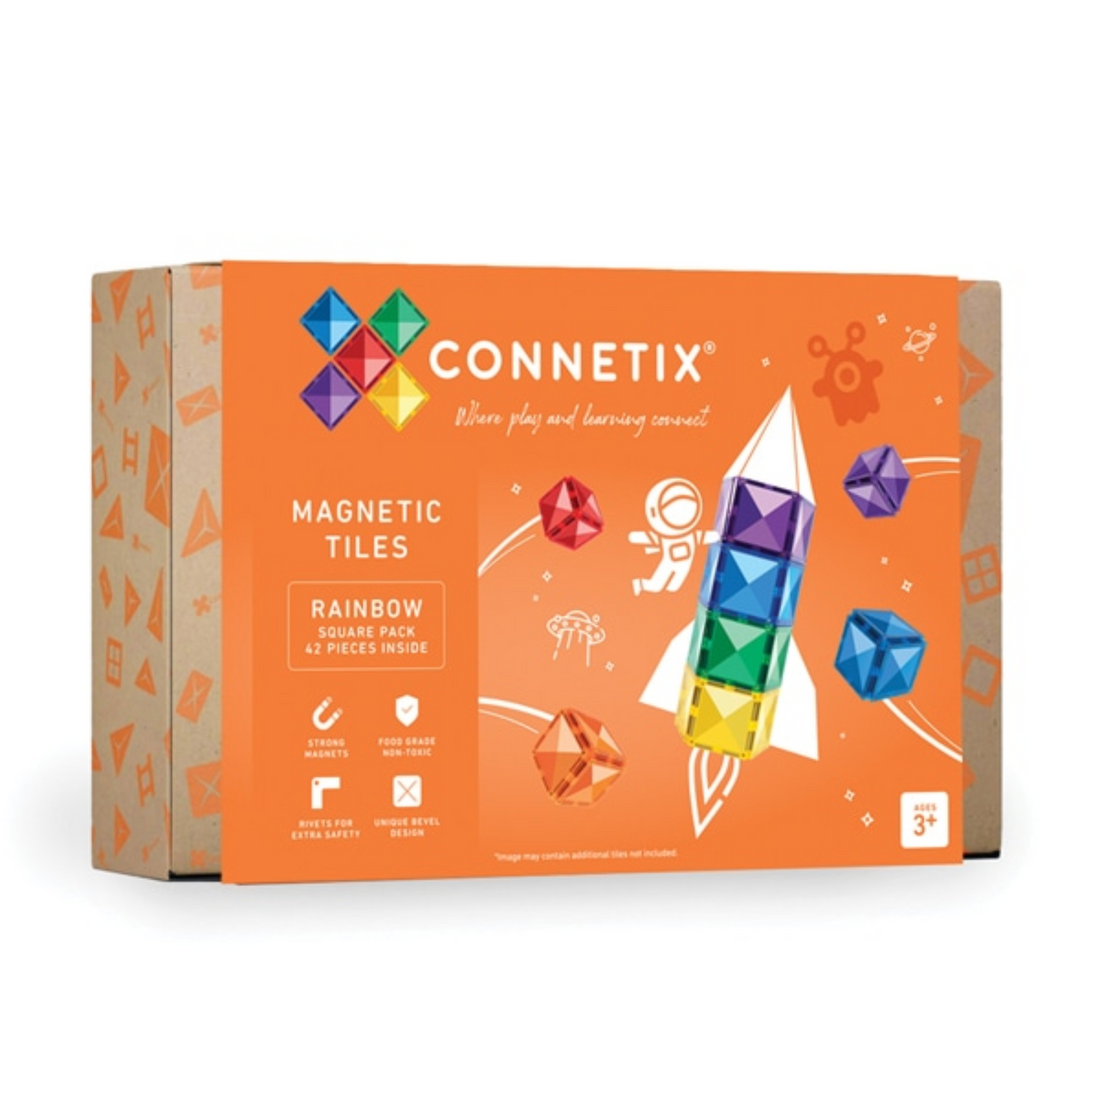 Connetix 40-piece magnetic constructor - Rainbow Square pack